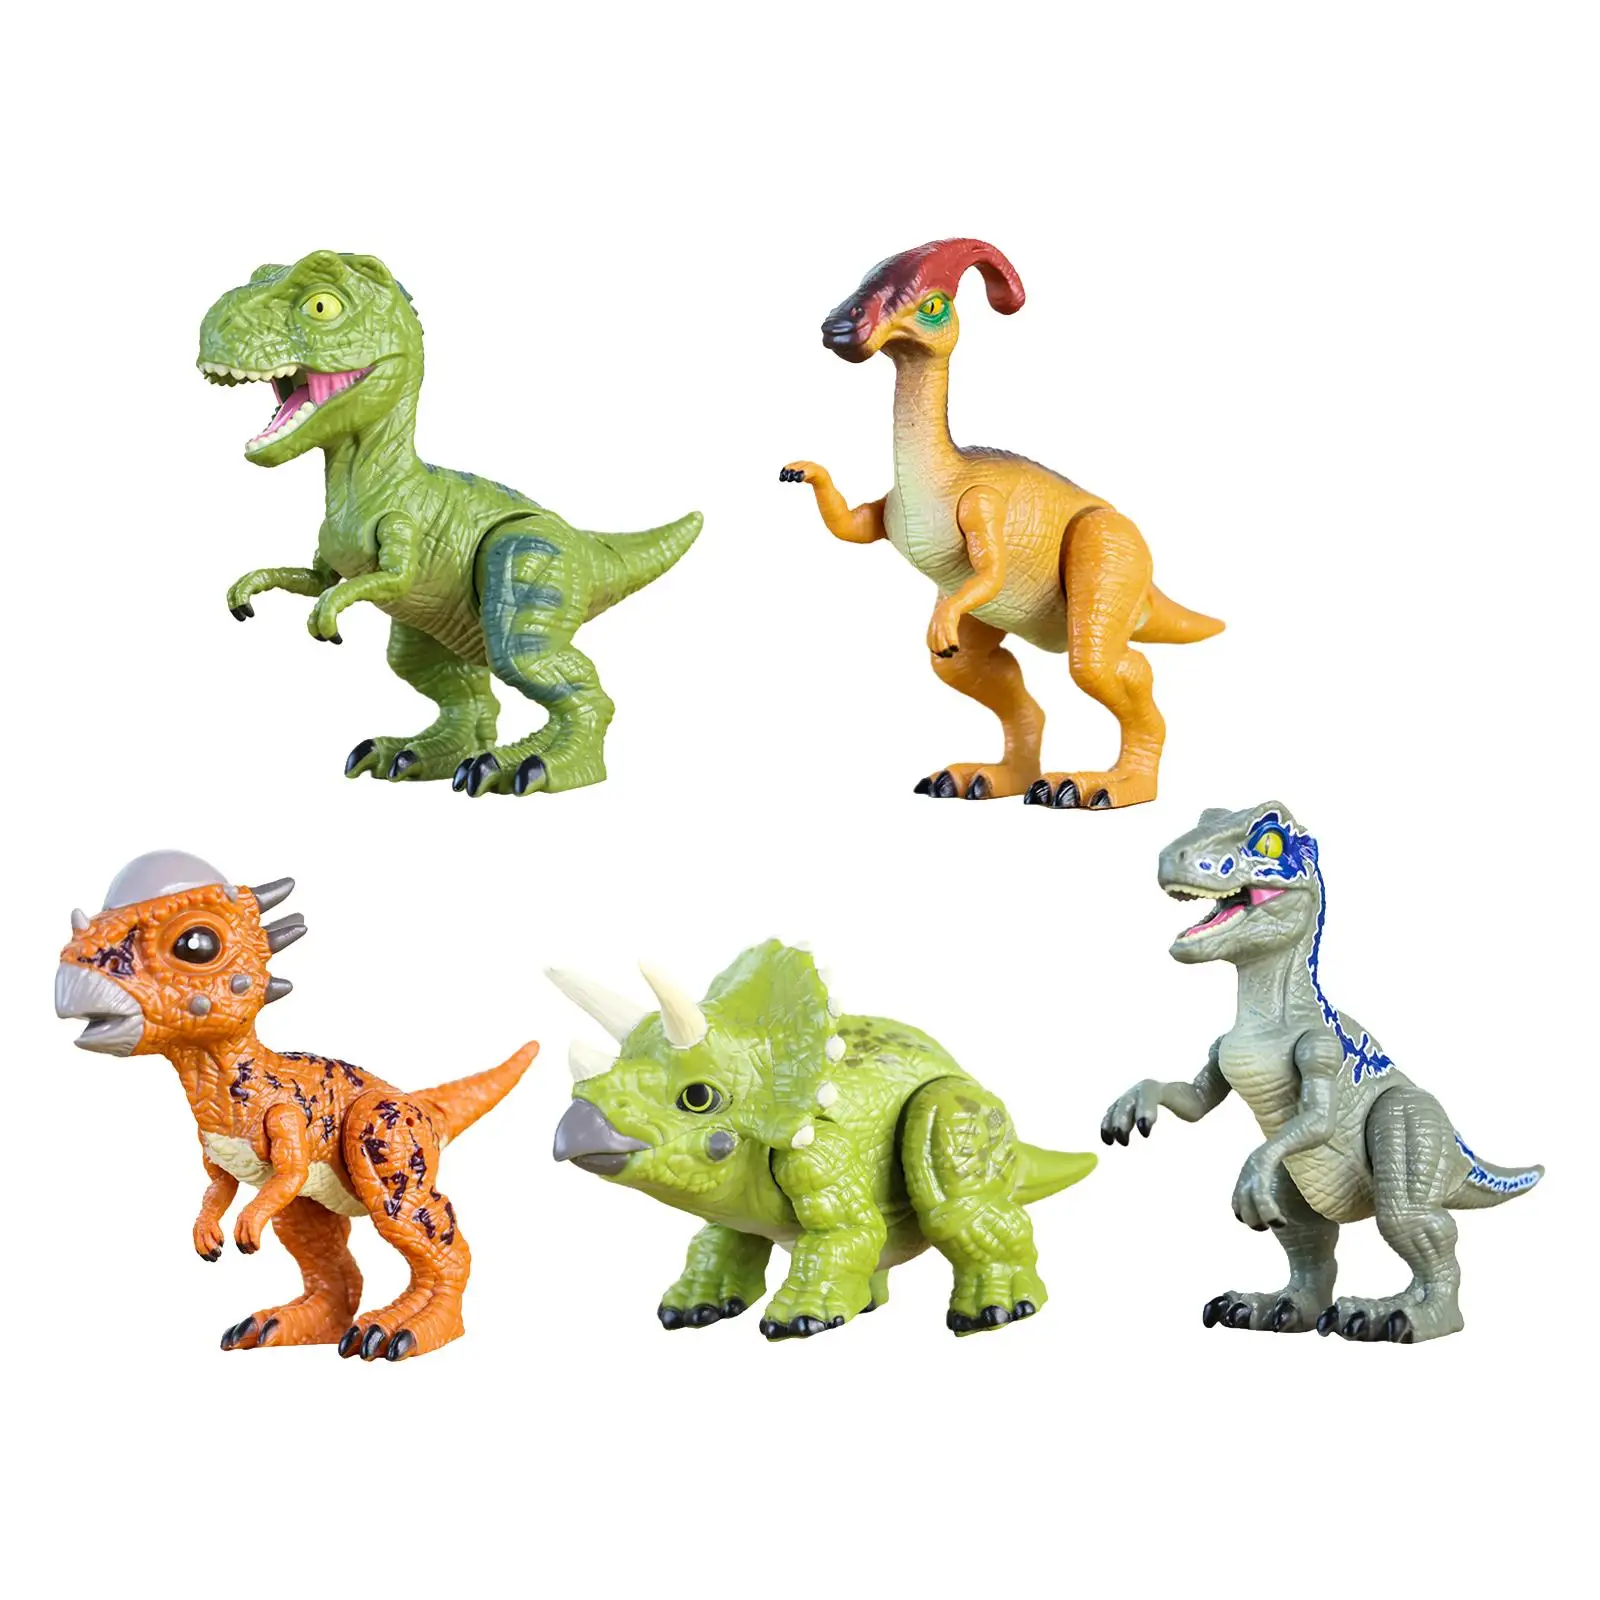 Dinosaur Action Figure Toy Animal Model Figure, Simulated Dinosaur Toy Movable Joints for Cars Party Favors Travel Role Play